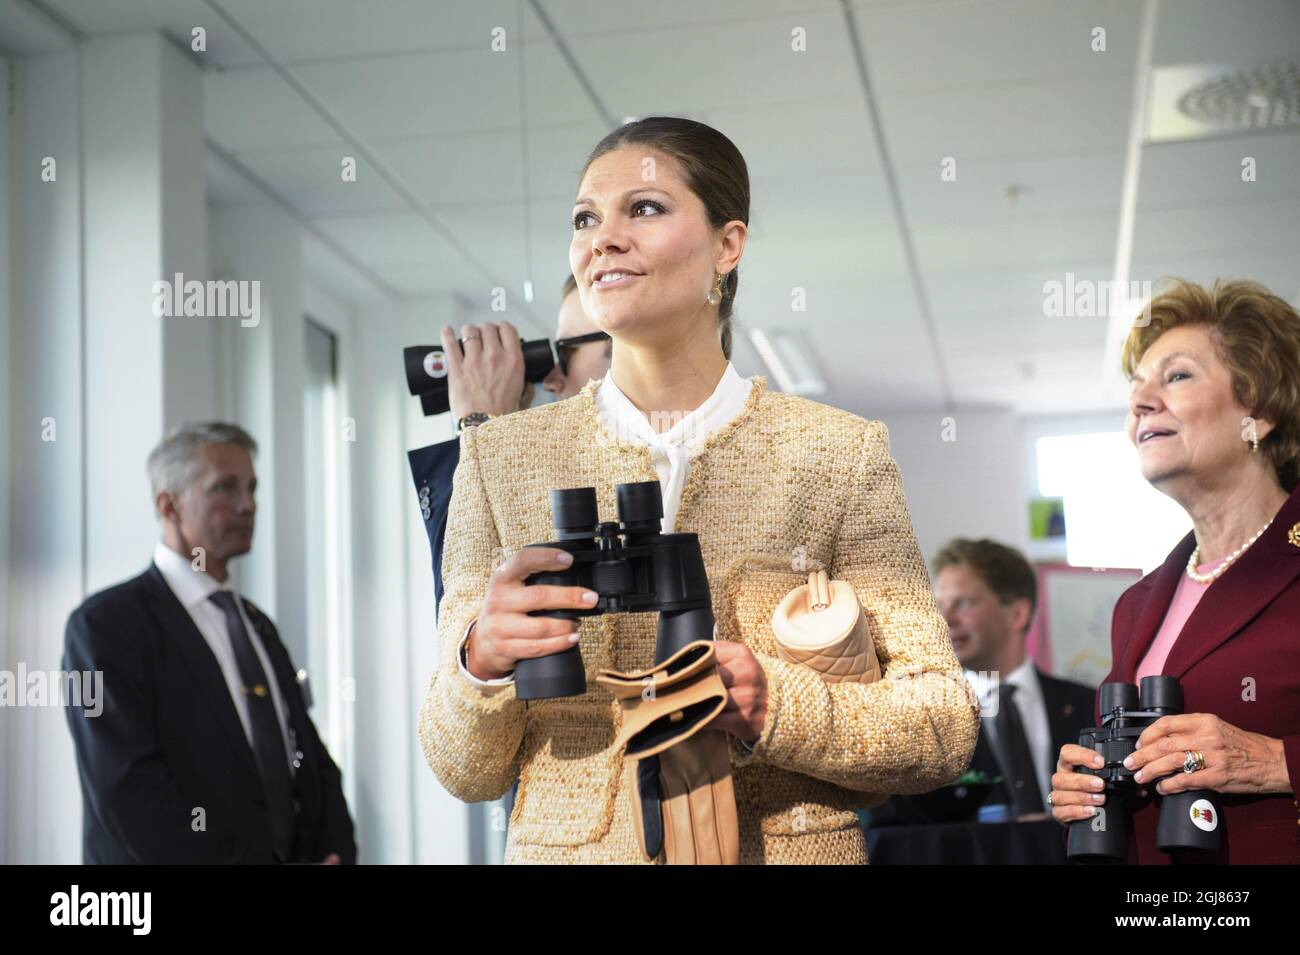 LUND 2013-10-03 Crown Princess Victoria and Maria Cavaco Silva are seen during a visit to Ideon Gateway in Lund, Sweden, October 3, 2013. The Crown Princess couple accompanied President Anibal Cavaco Silva and his wife Maria. The Ideon Gateway is a model for building a city part designed for research and innovation. The President of Portugal is on a State visit to Sweden. Foto: Ludvig Thunman / TT / Kod 10600  Stock Photo